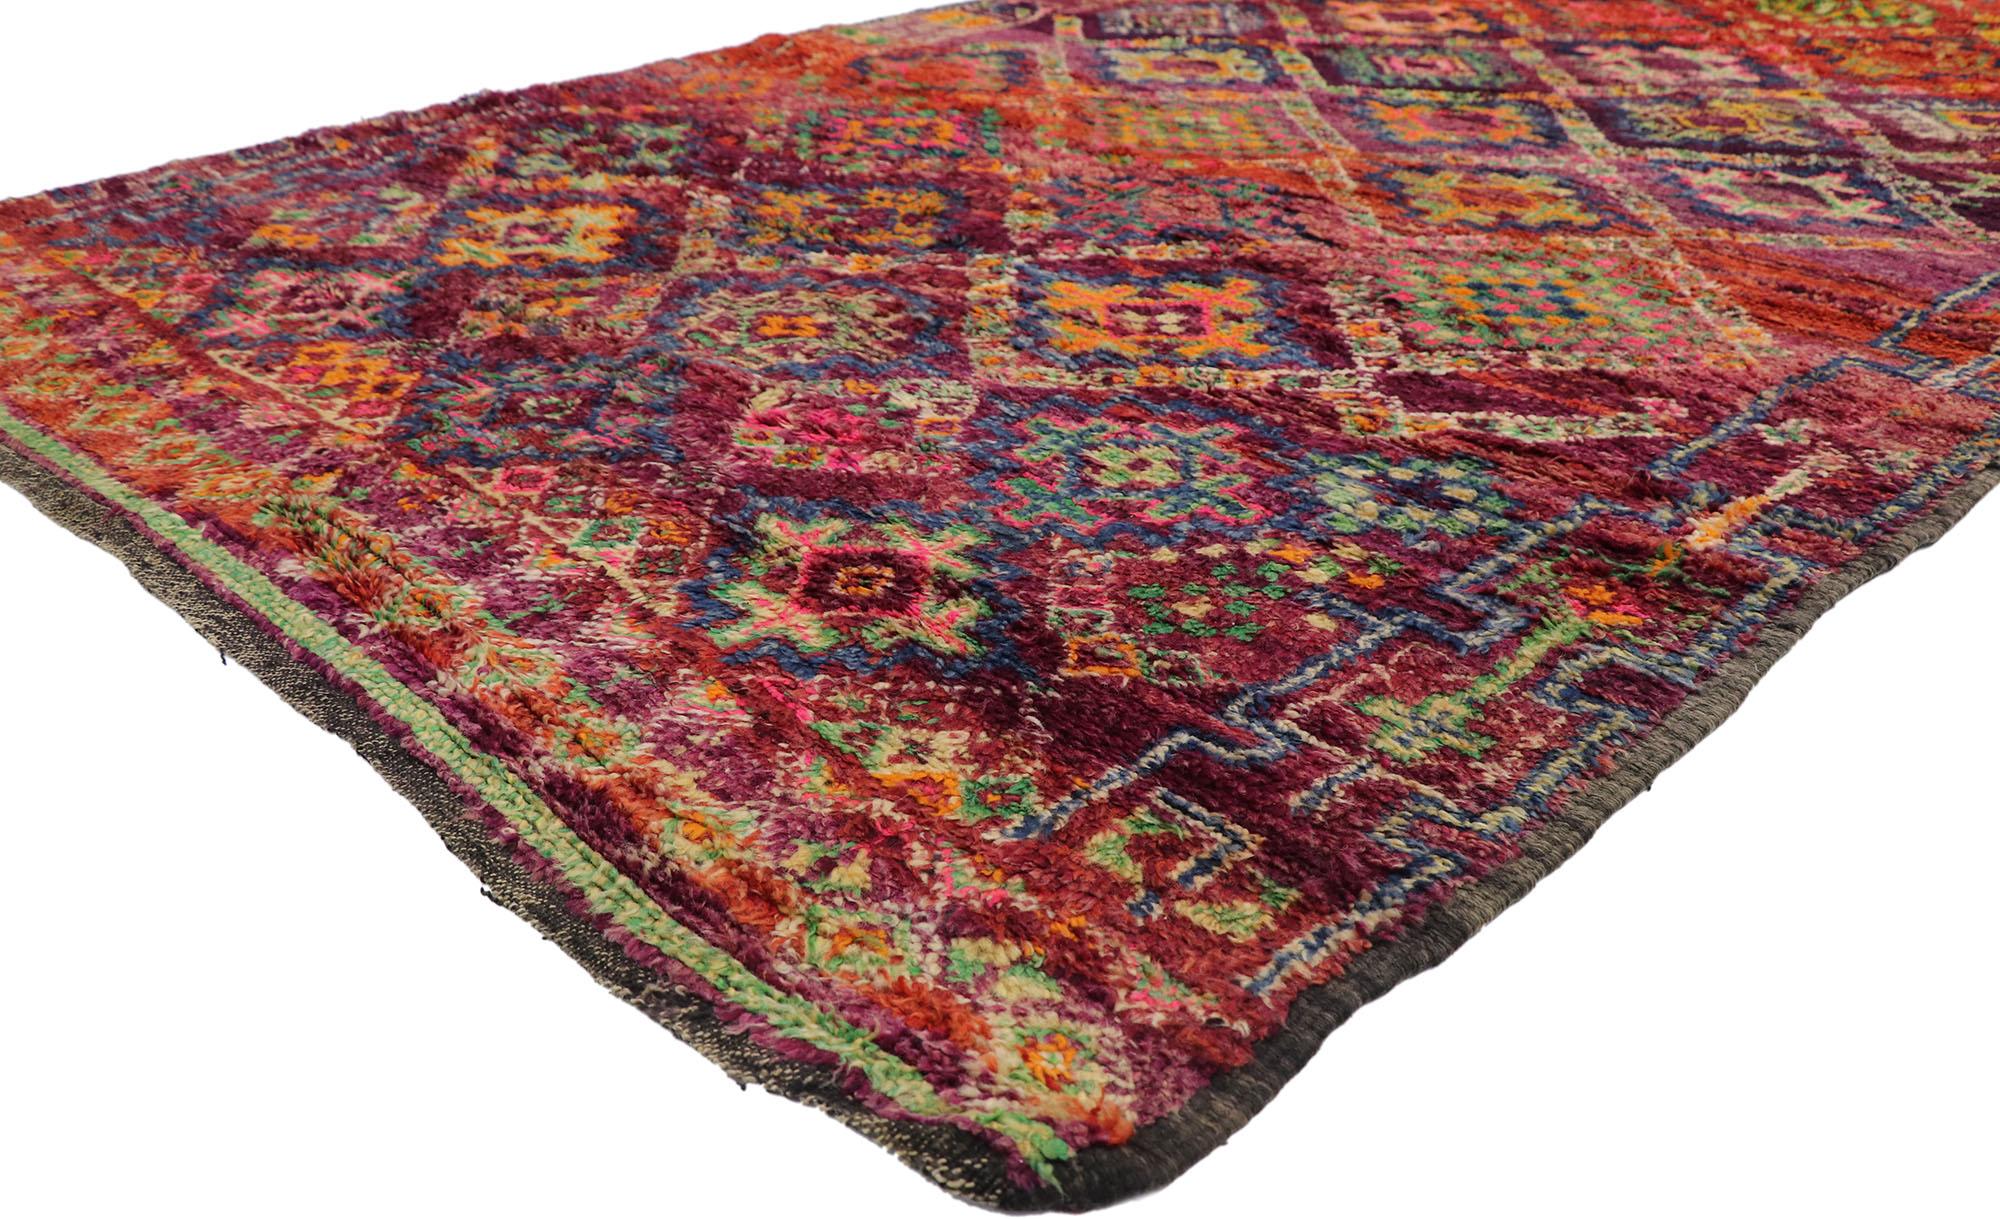 21321 Vintage Berber Beni M'Guild Moroccan rug with Bohemian Style 06'02 x 09'11. Showcasing a bold expressive design, incredible detail and texture, this hand knotted wool vintage Berber Beni M'Guild Moroccan rug is a captivating vision of woven